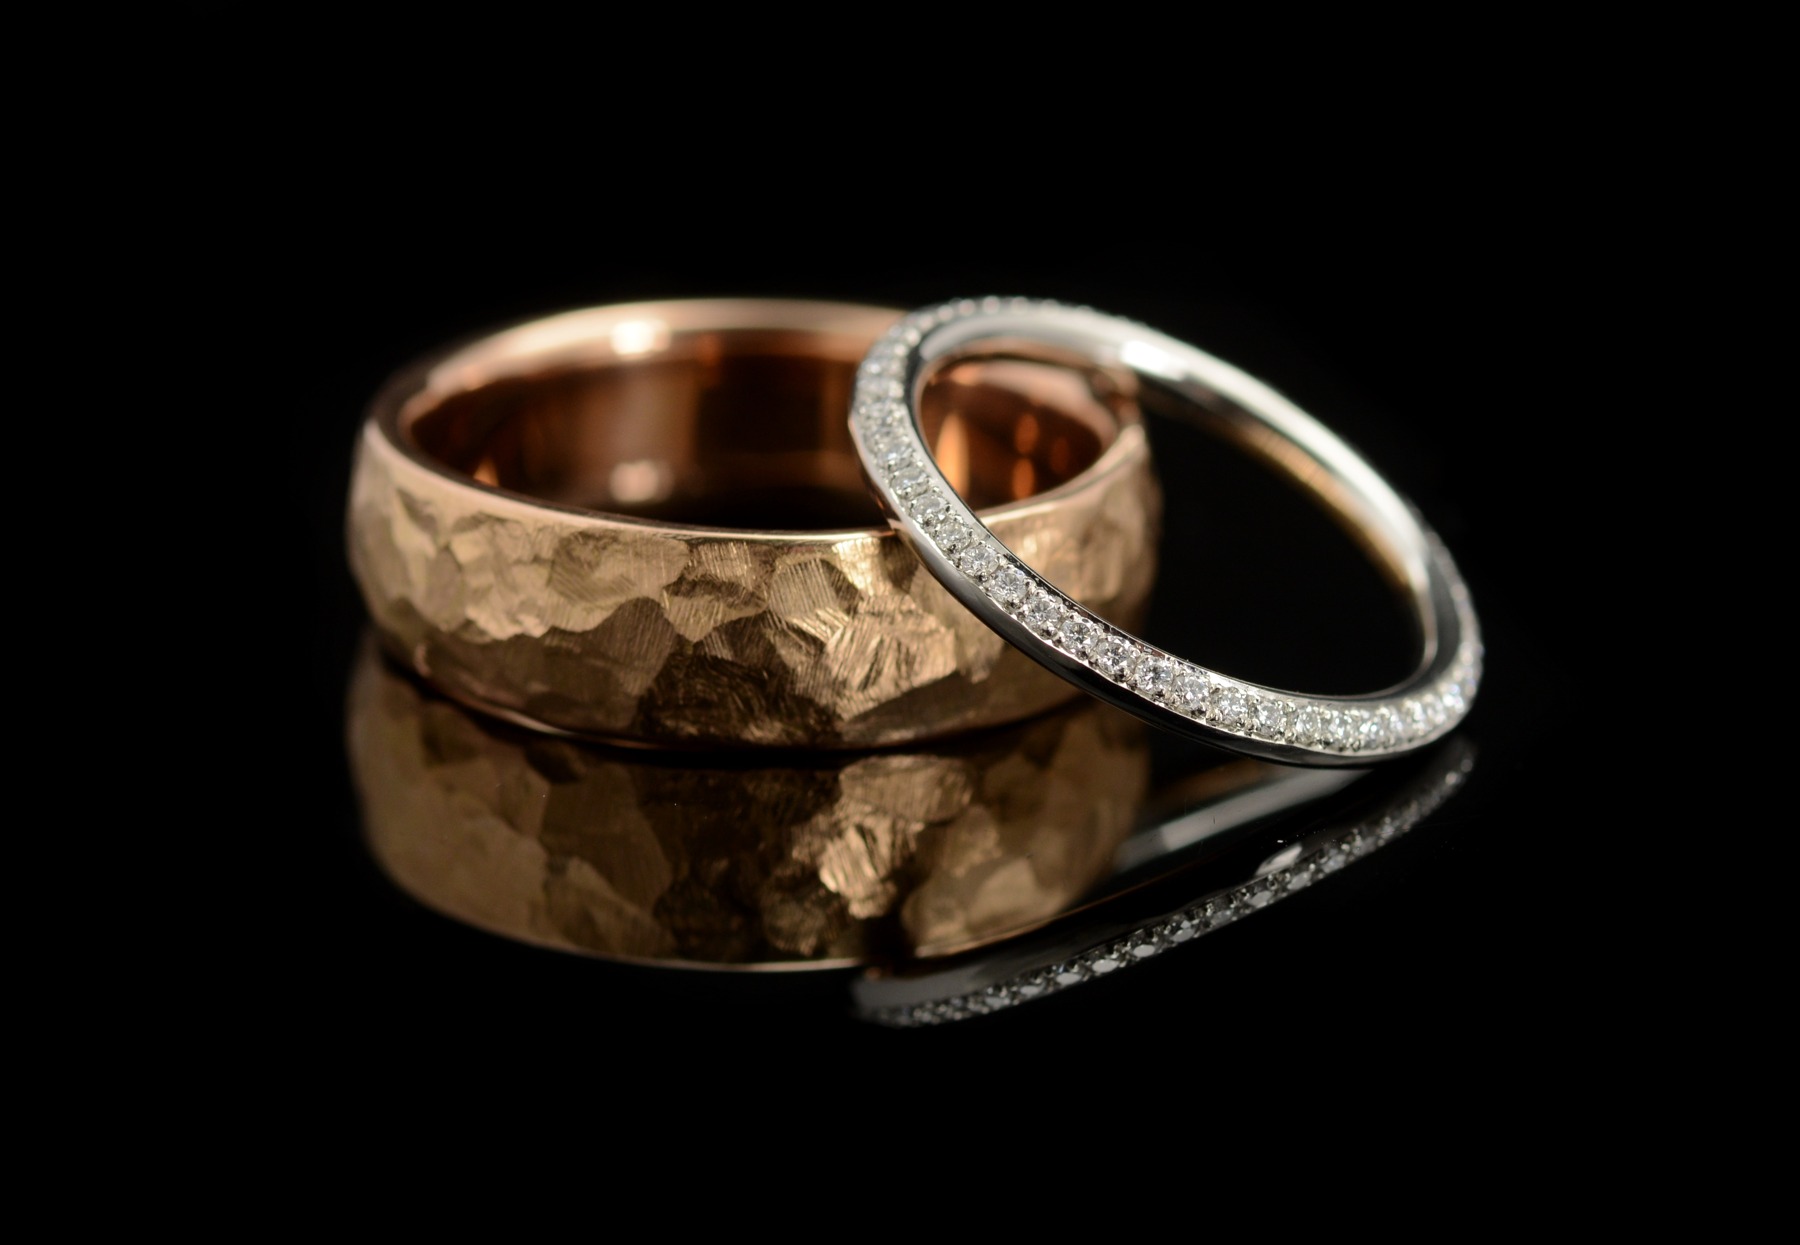 Unique ladies diamond wedding ring and rose gold mens hammered wedding ring